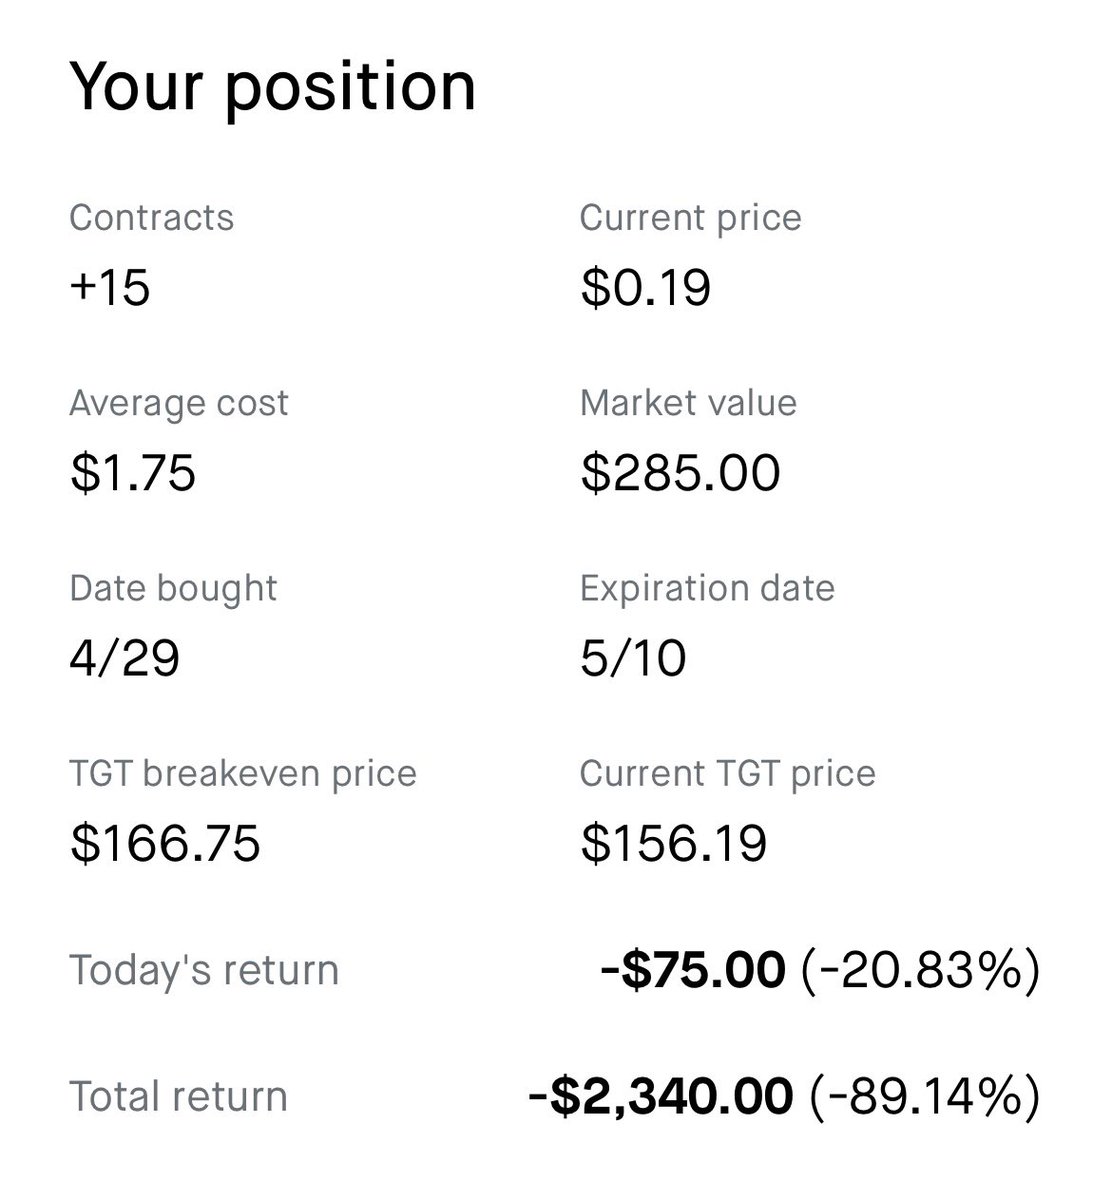 Had to take my loss on $TGT calls this morning.